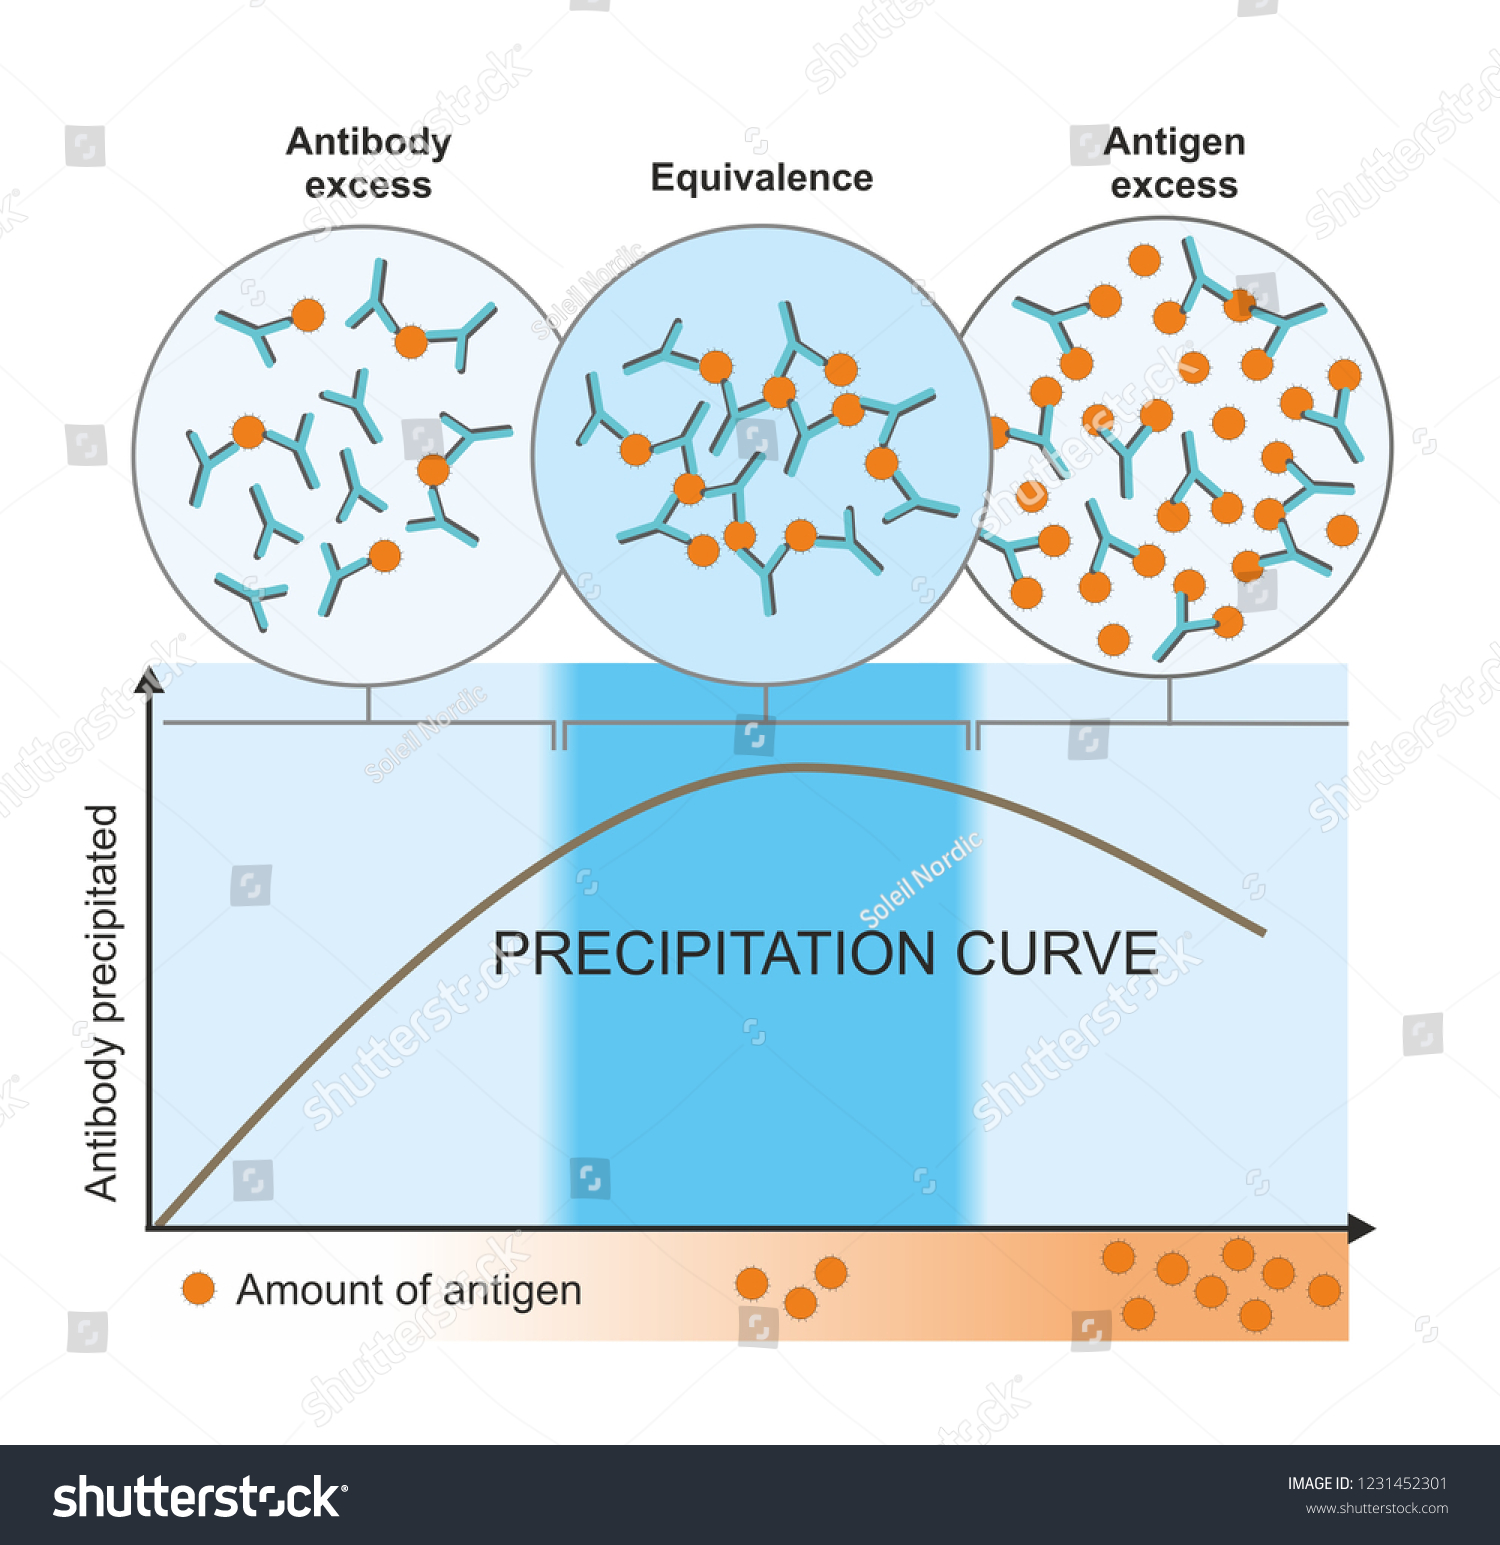 stock-photo-the-curve-shows-the-stages-of-precipitation-of-an-antigen-antibody-complex-precipitation-is-formed-1231452301.jpg#s-1500,1545